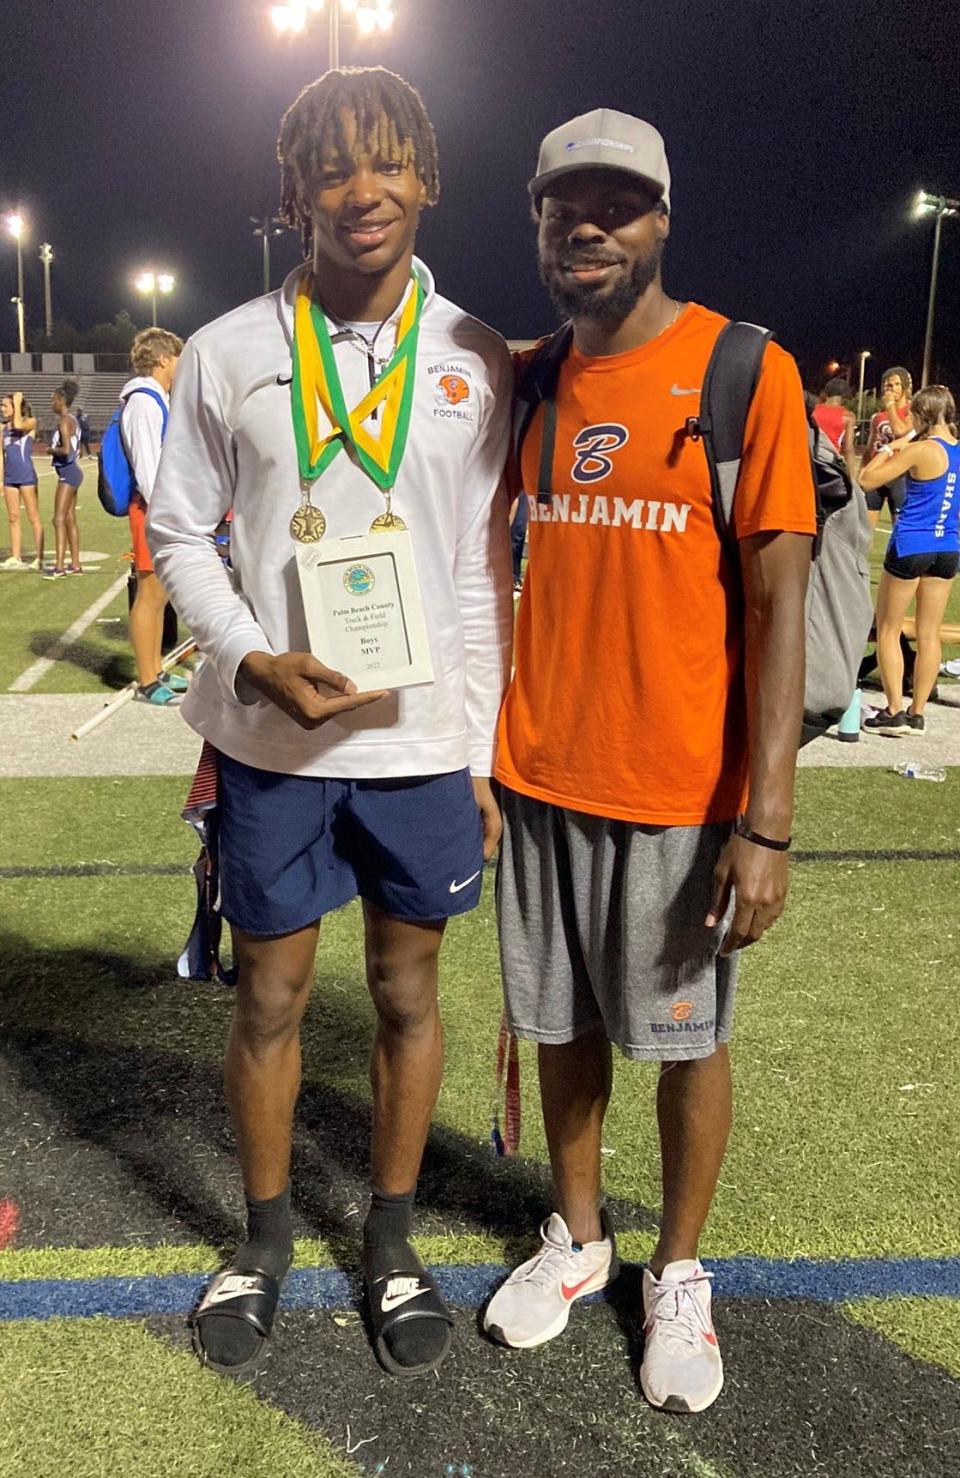 "Micah had one of the best performances in the history of the county meet. He always steps up when called on. It's why he's one of the top track athletes in the state," Benjamin coach Barrett Saunders said, pictured with meet MVP Micah Mays (left).